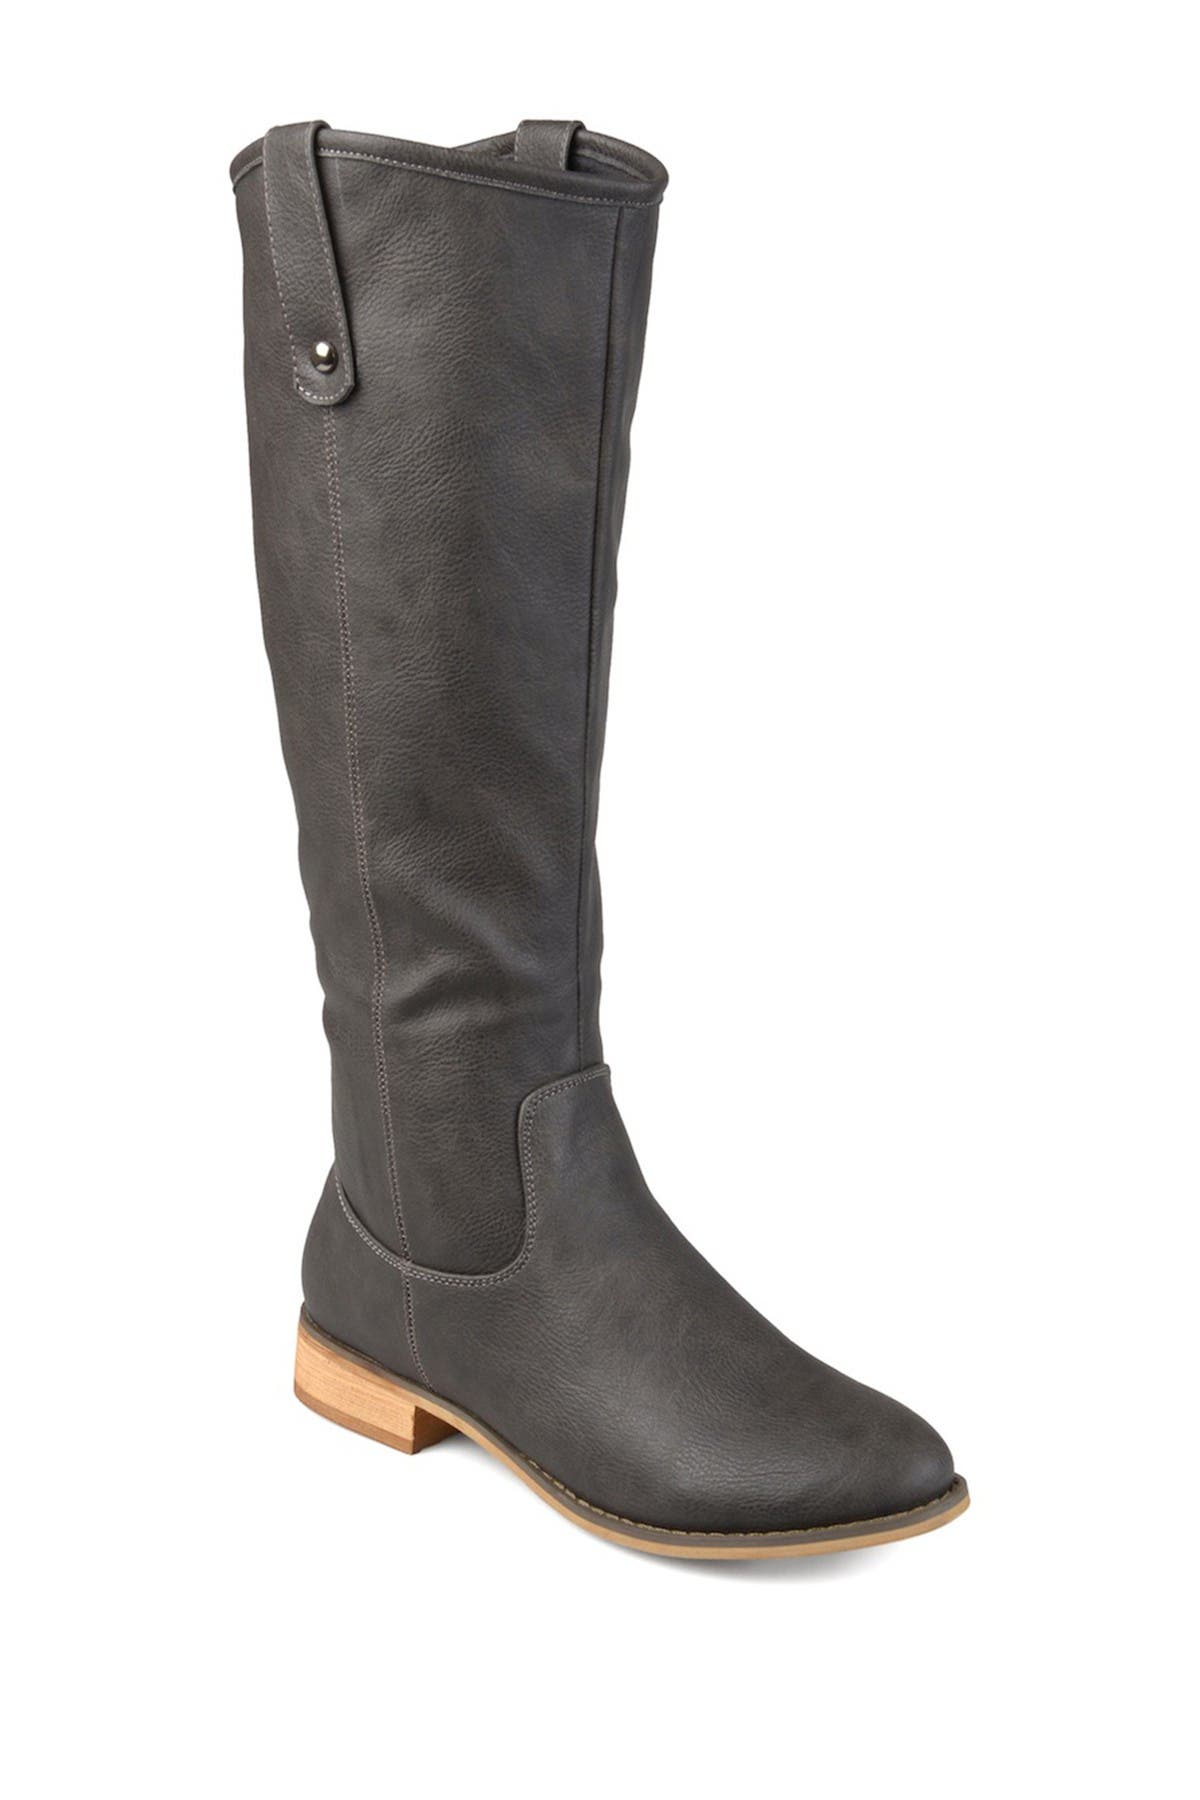 extra wide calf boots for ladies